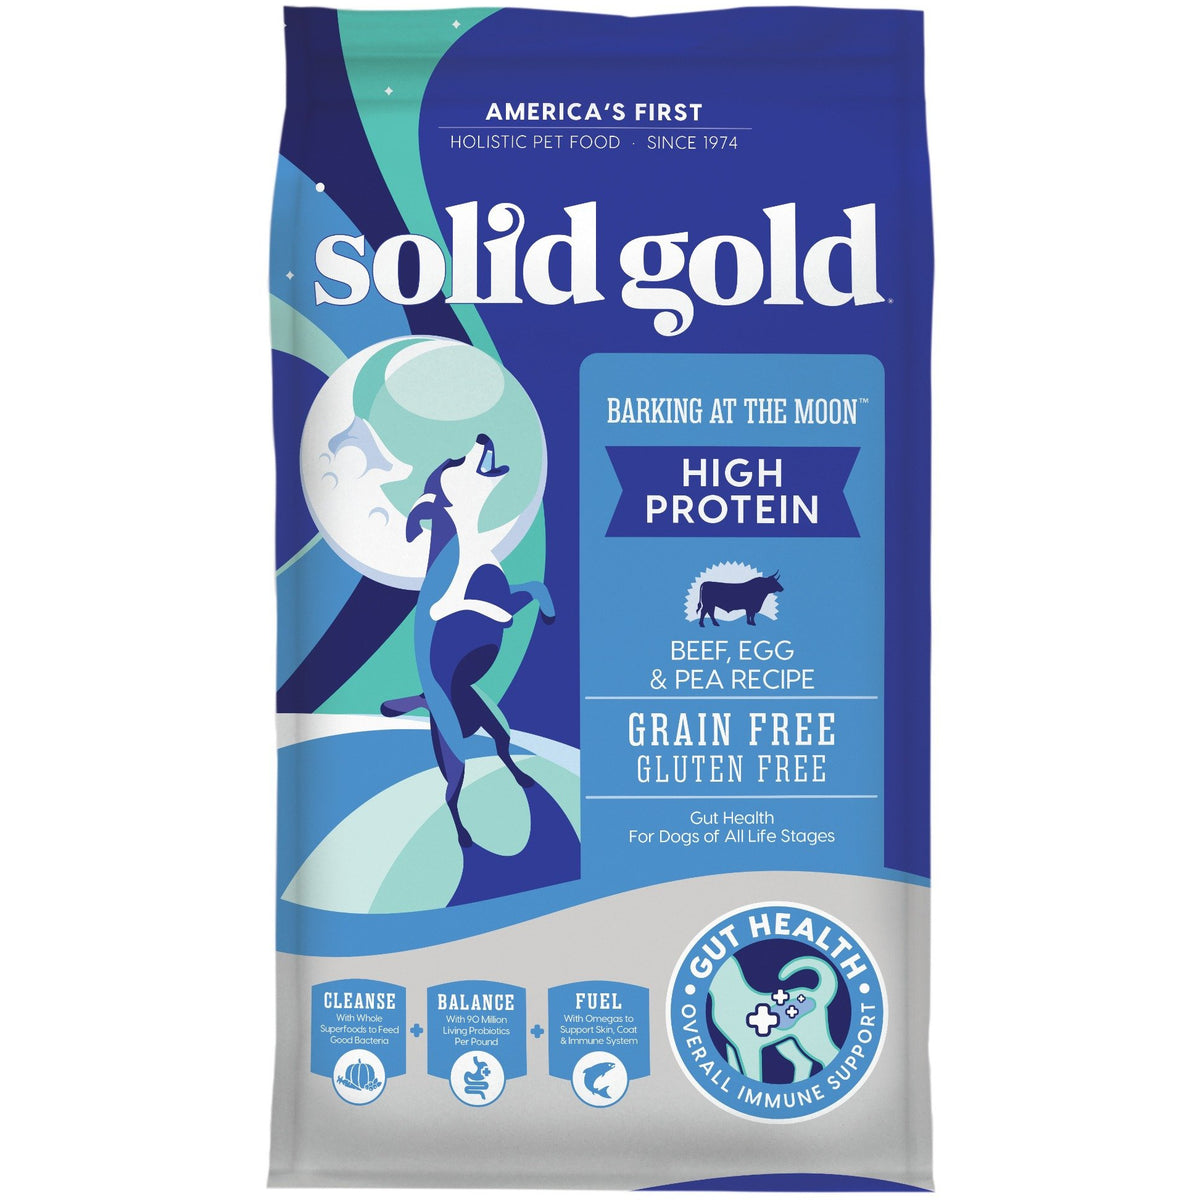 The Ultimate Checklist For New Pets – solidgoldpets